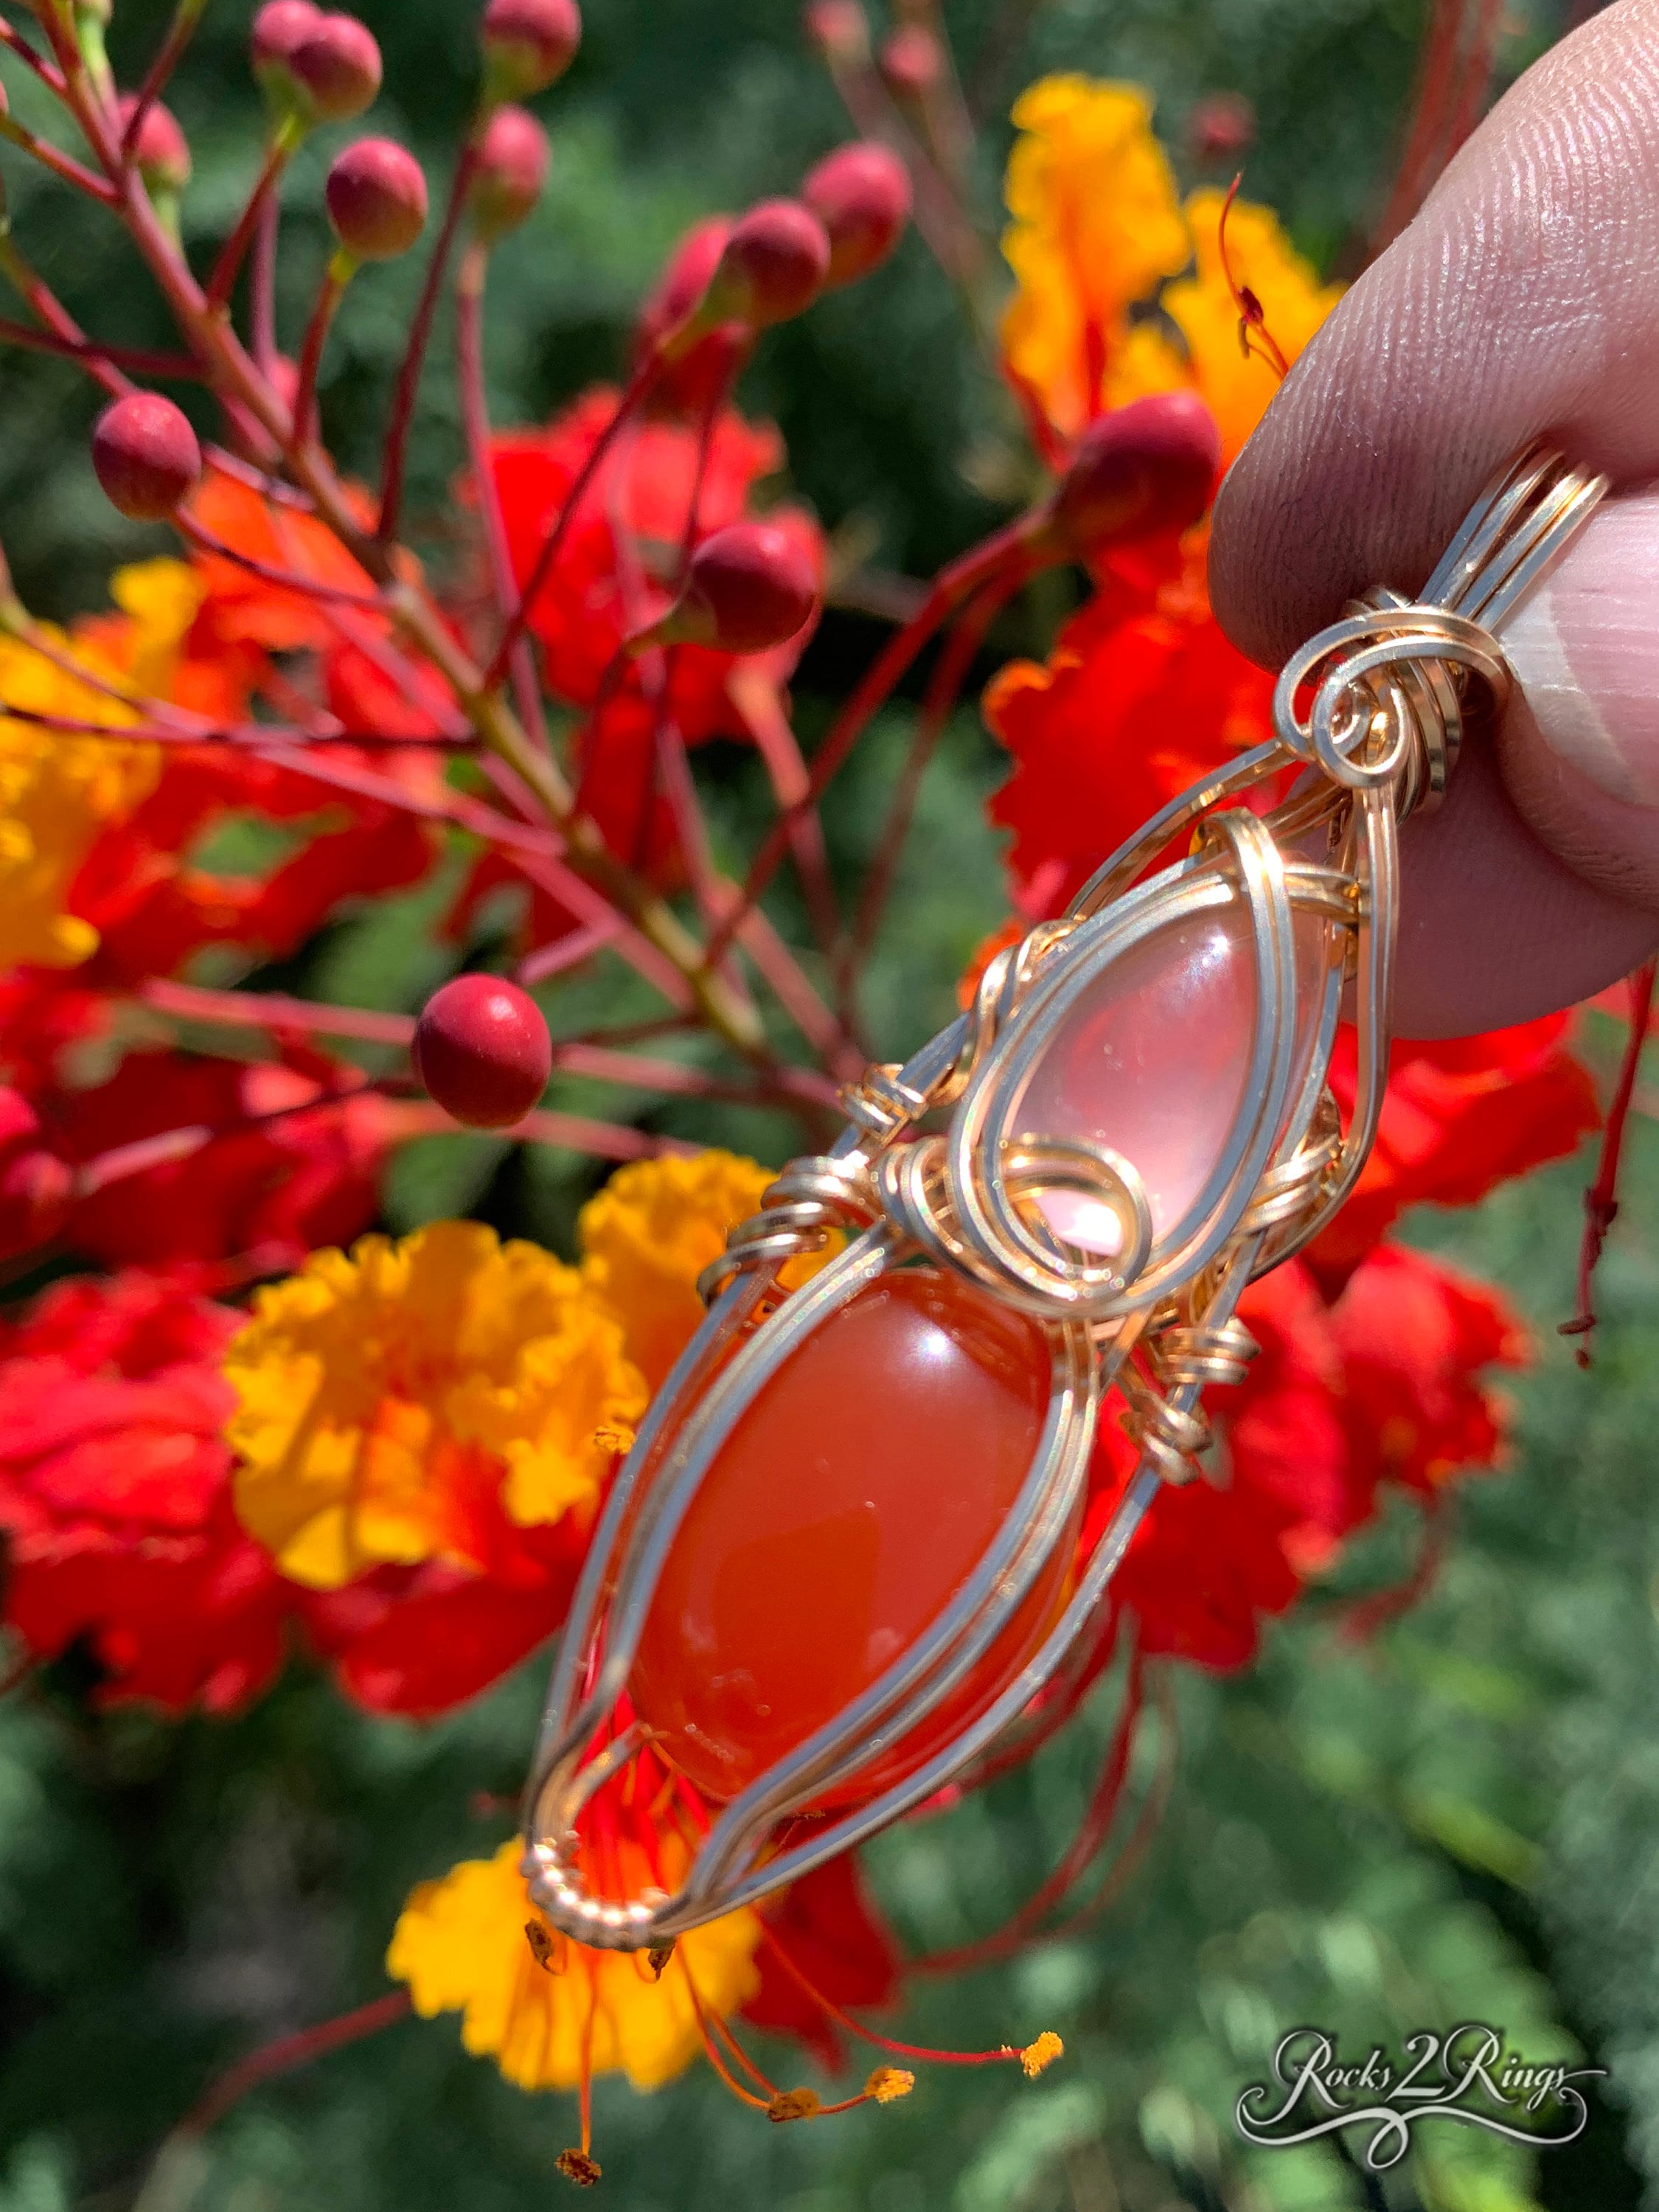 Amazon.com: Carnelian Beads Necklace with Pear Shape Pendant in Shades of  Peach Orange Red, One of a Kind Gift : Handmade Products